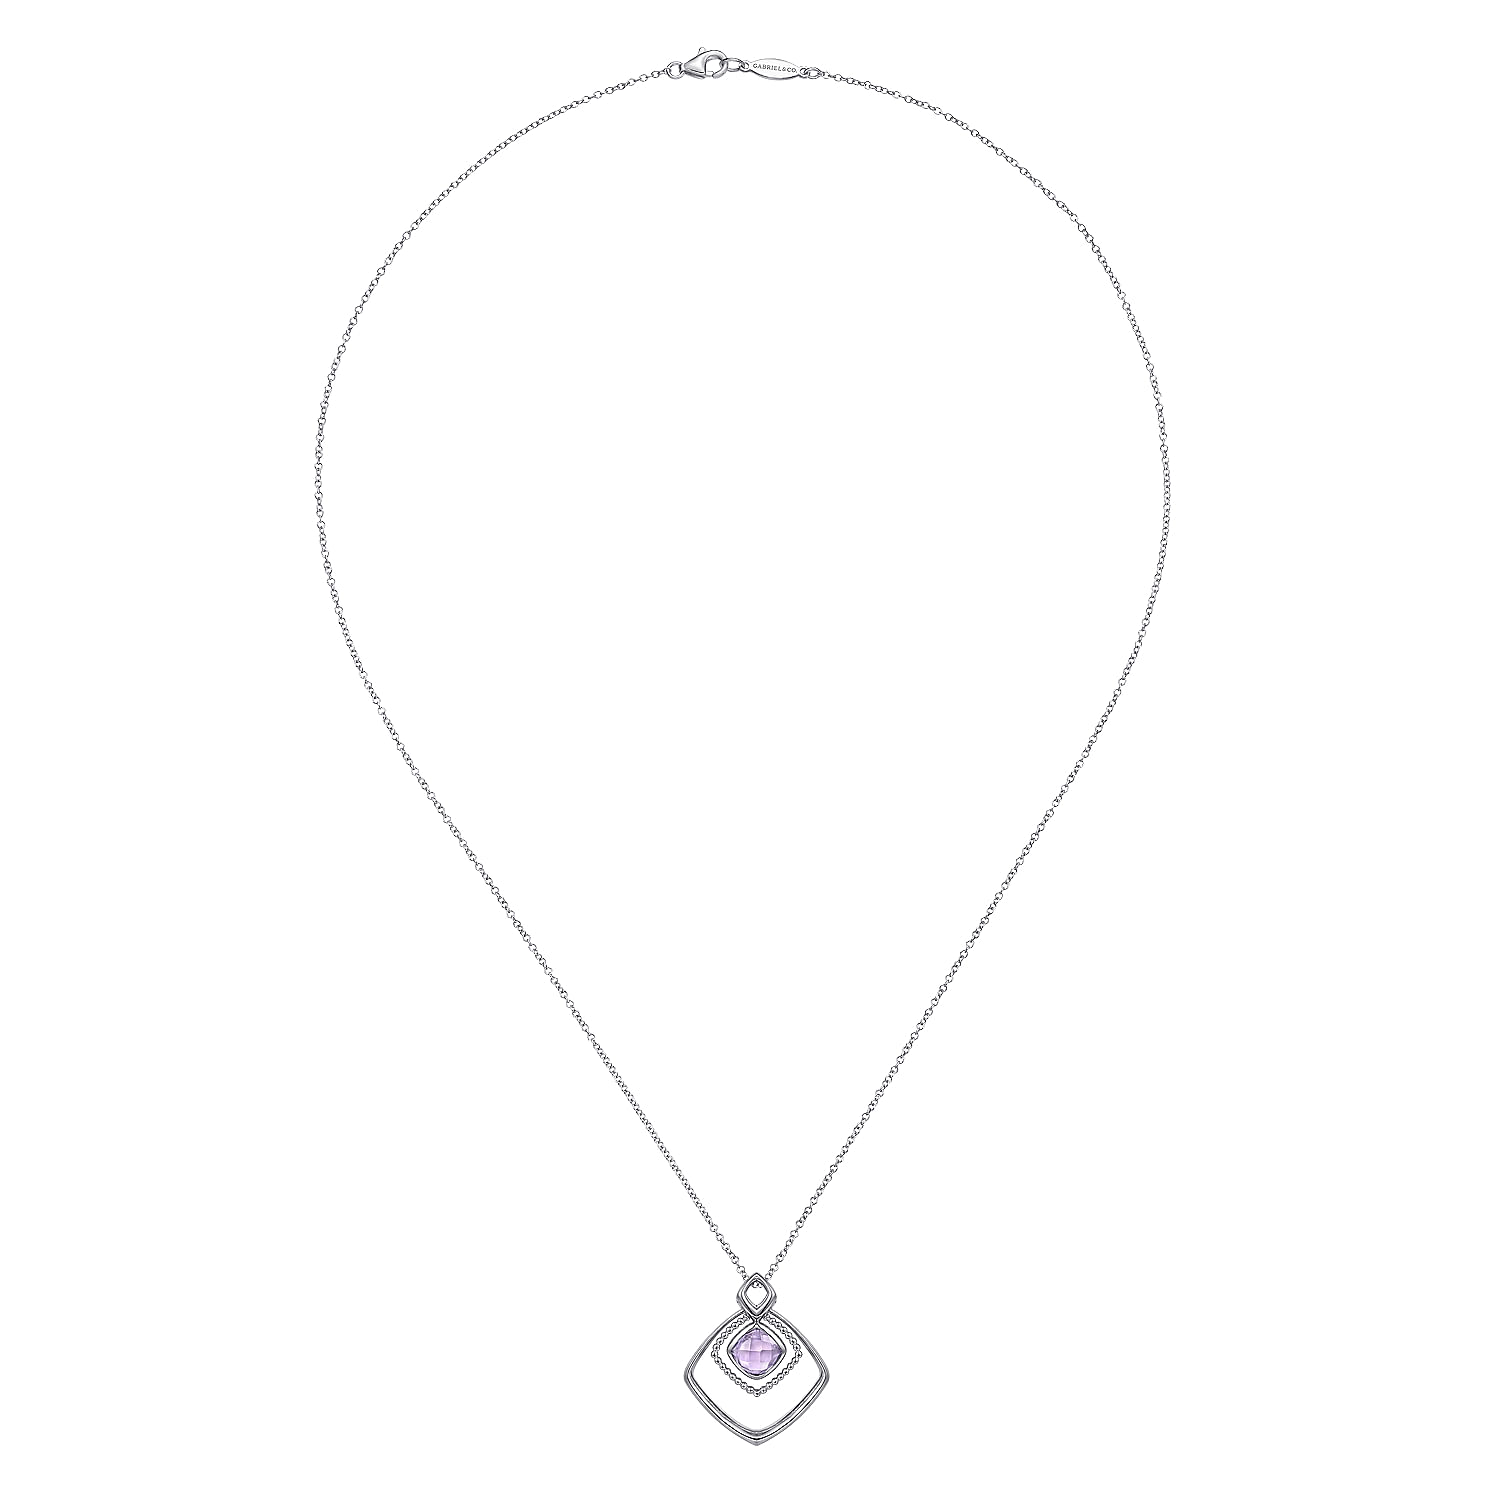  925 Sterling Silver Layered Squares Pendant Necklace with Pink Amethyst Drop